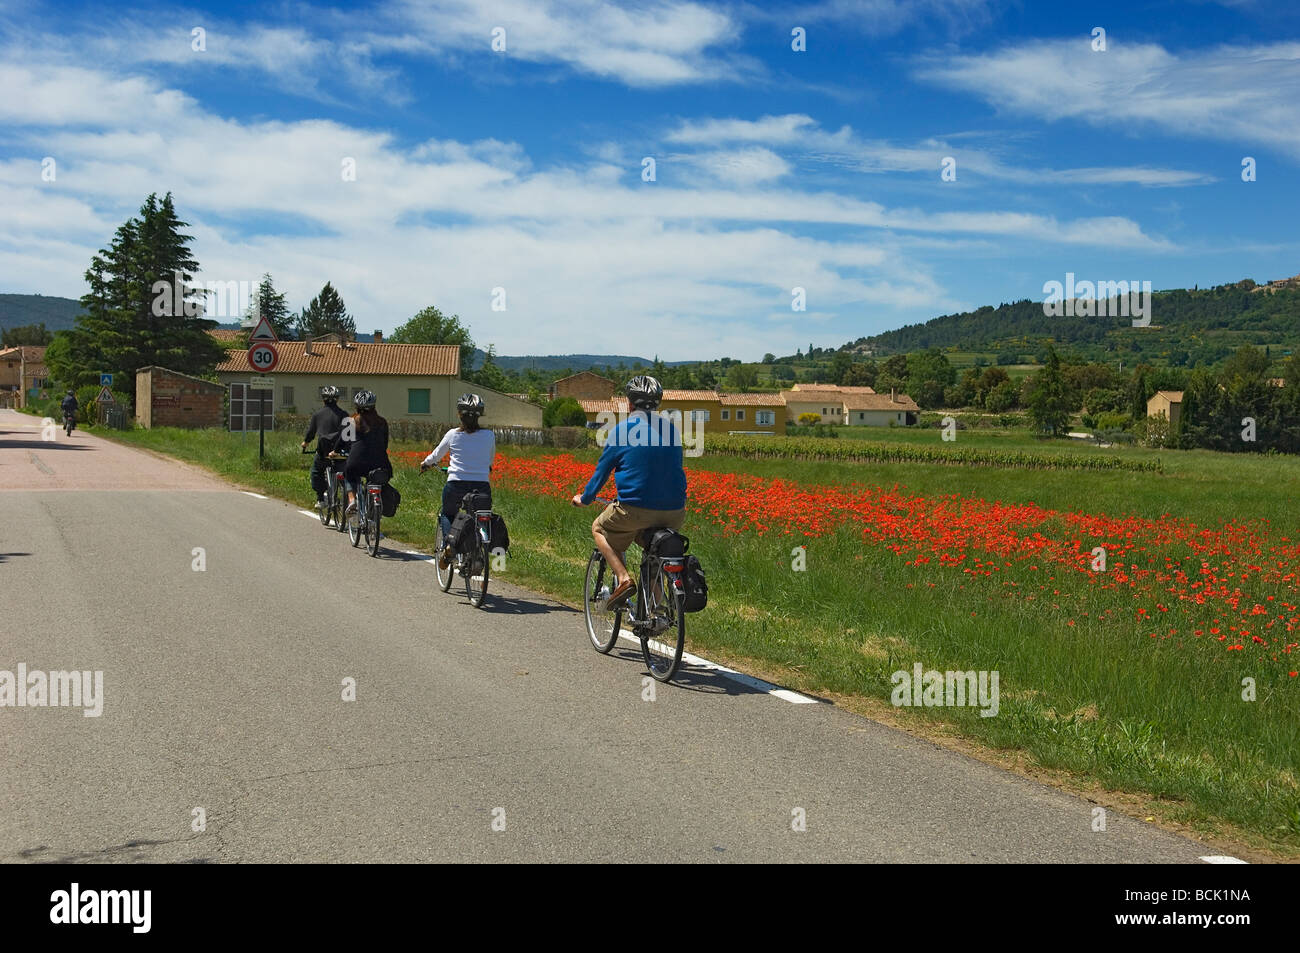 A party of cyclists on electric bicycles are touring the quiet poppy lined country roads of Provence France Stock Photo